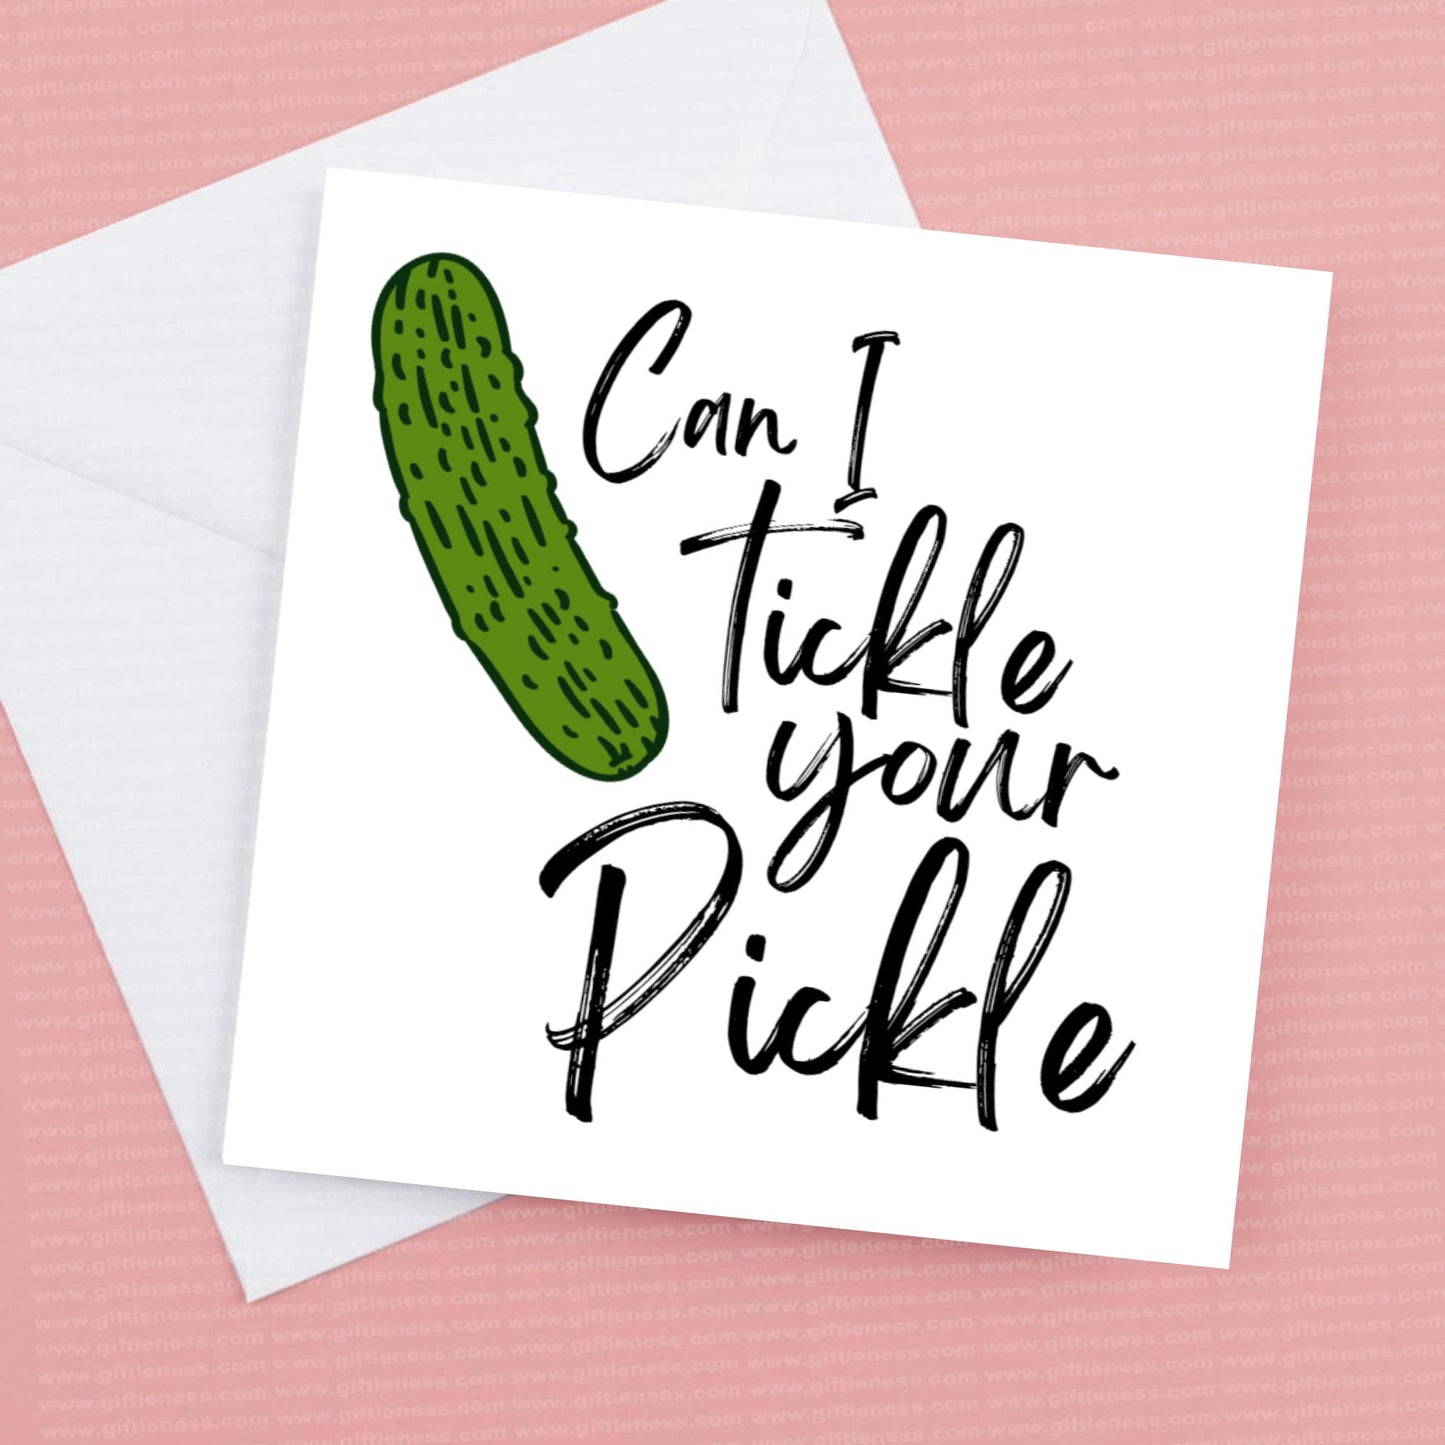 Happy Valentines Day Cheeky Rude Card can I tickle your pickle